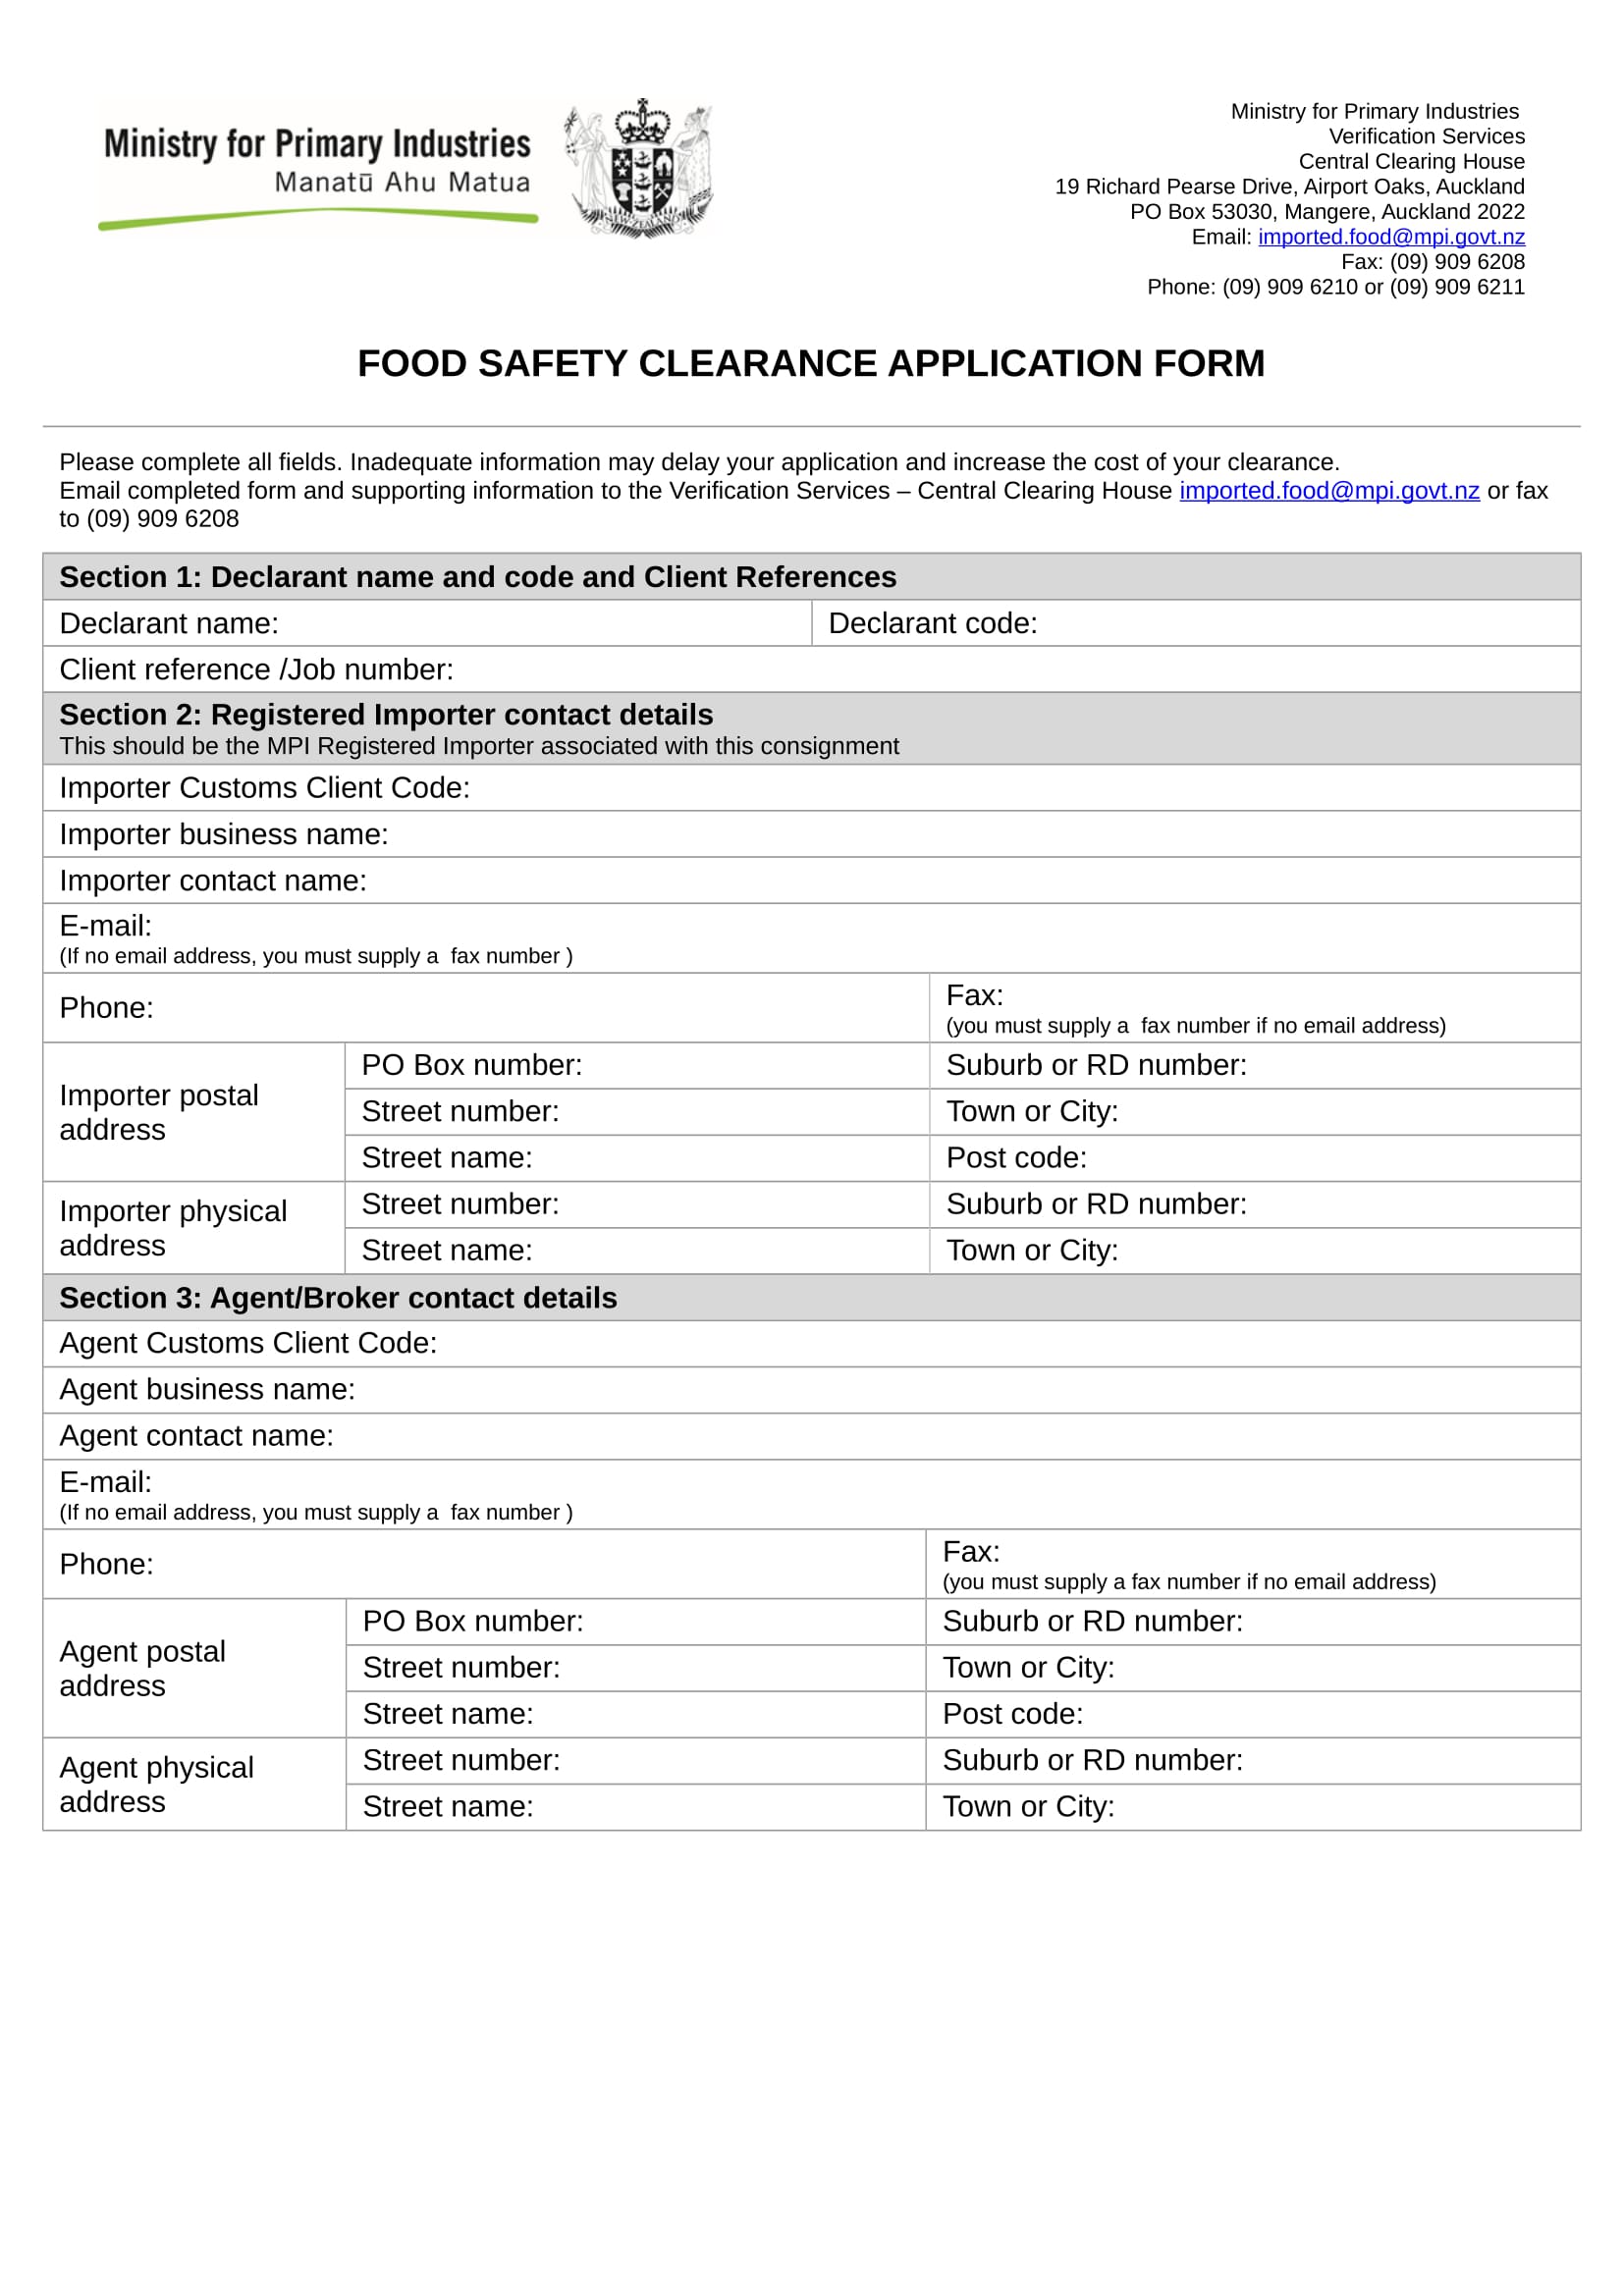 food safety clearance application form 1